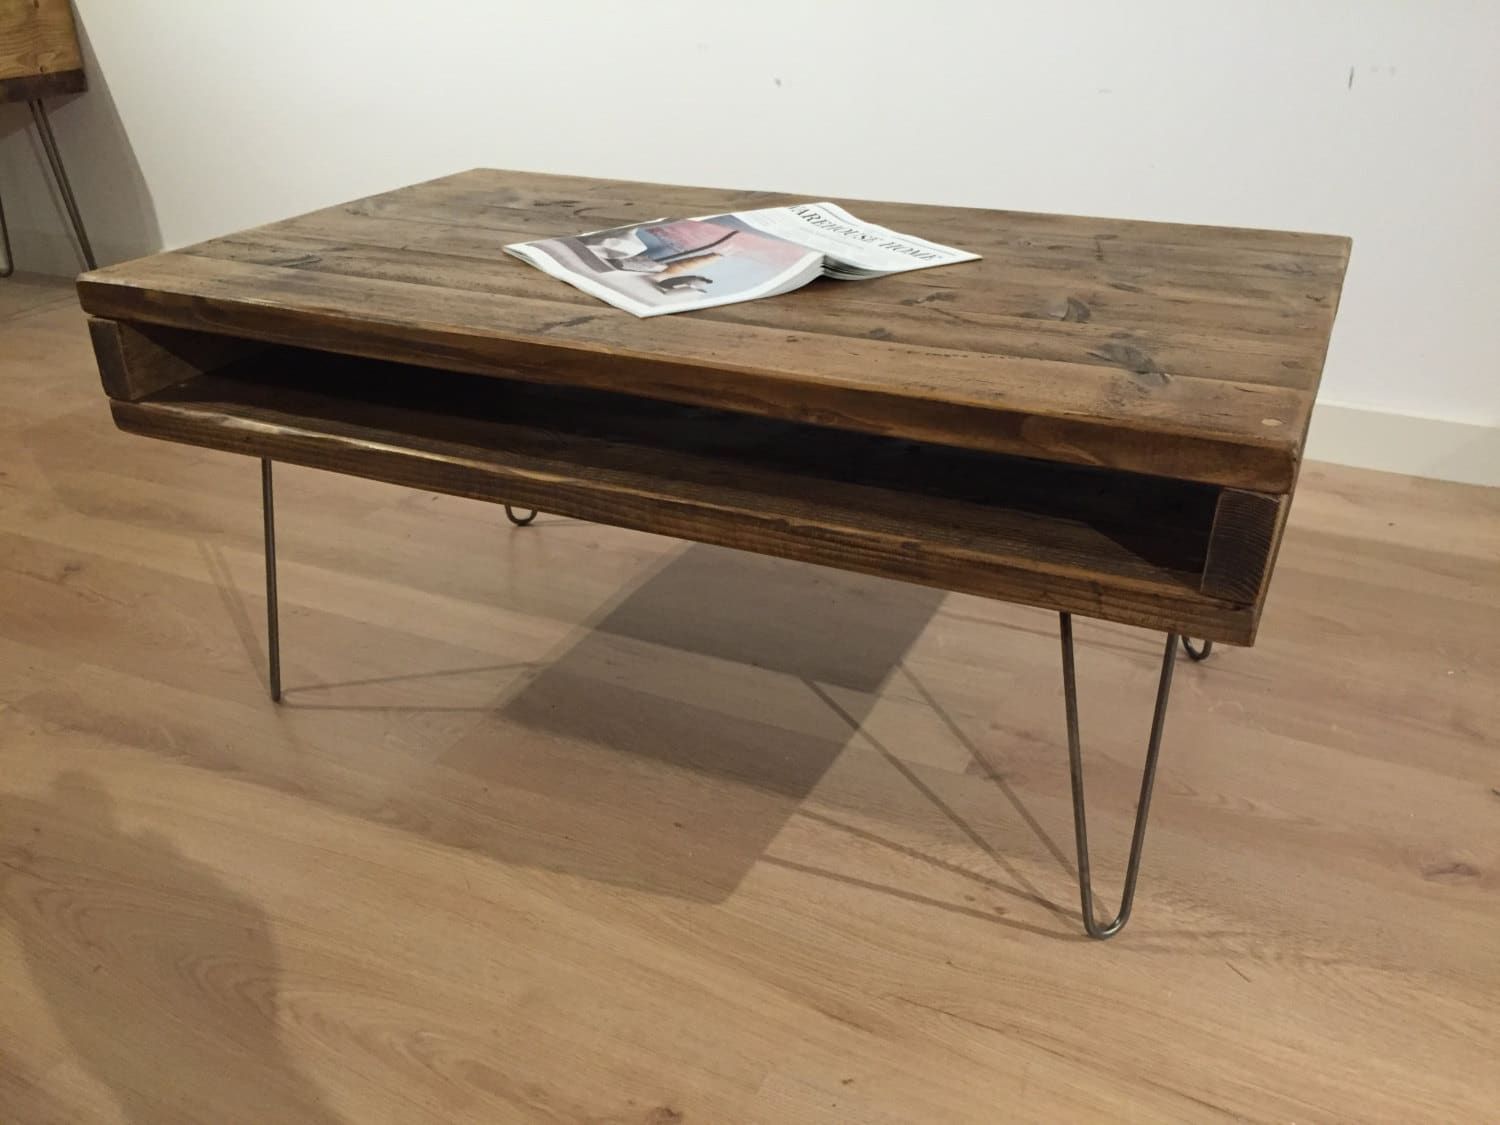 Reclaimed Rustic Solid Pine Box Coffee Table Or Tv Stand In Oak Wood And Metal Legs Coffee Tables (View 4 of 15)